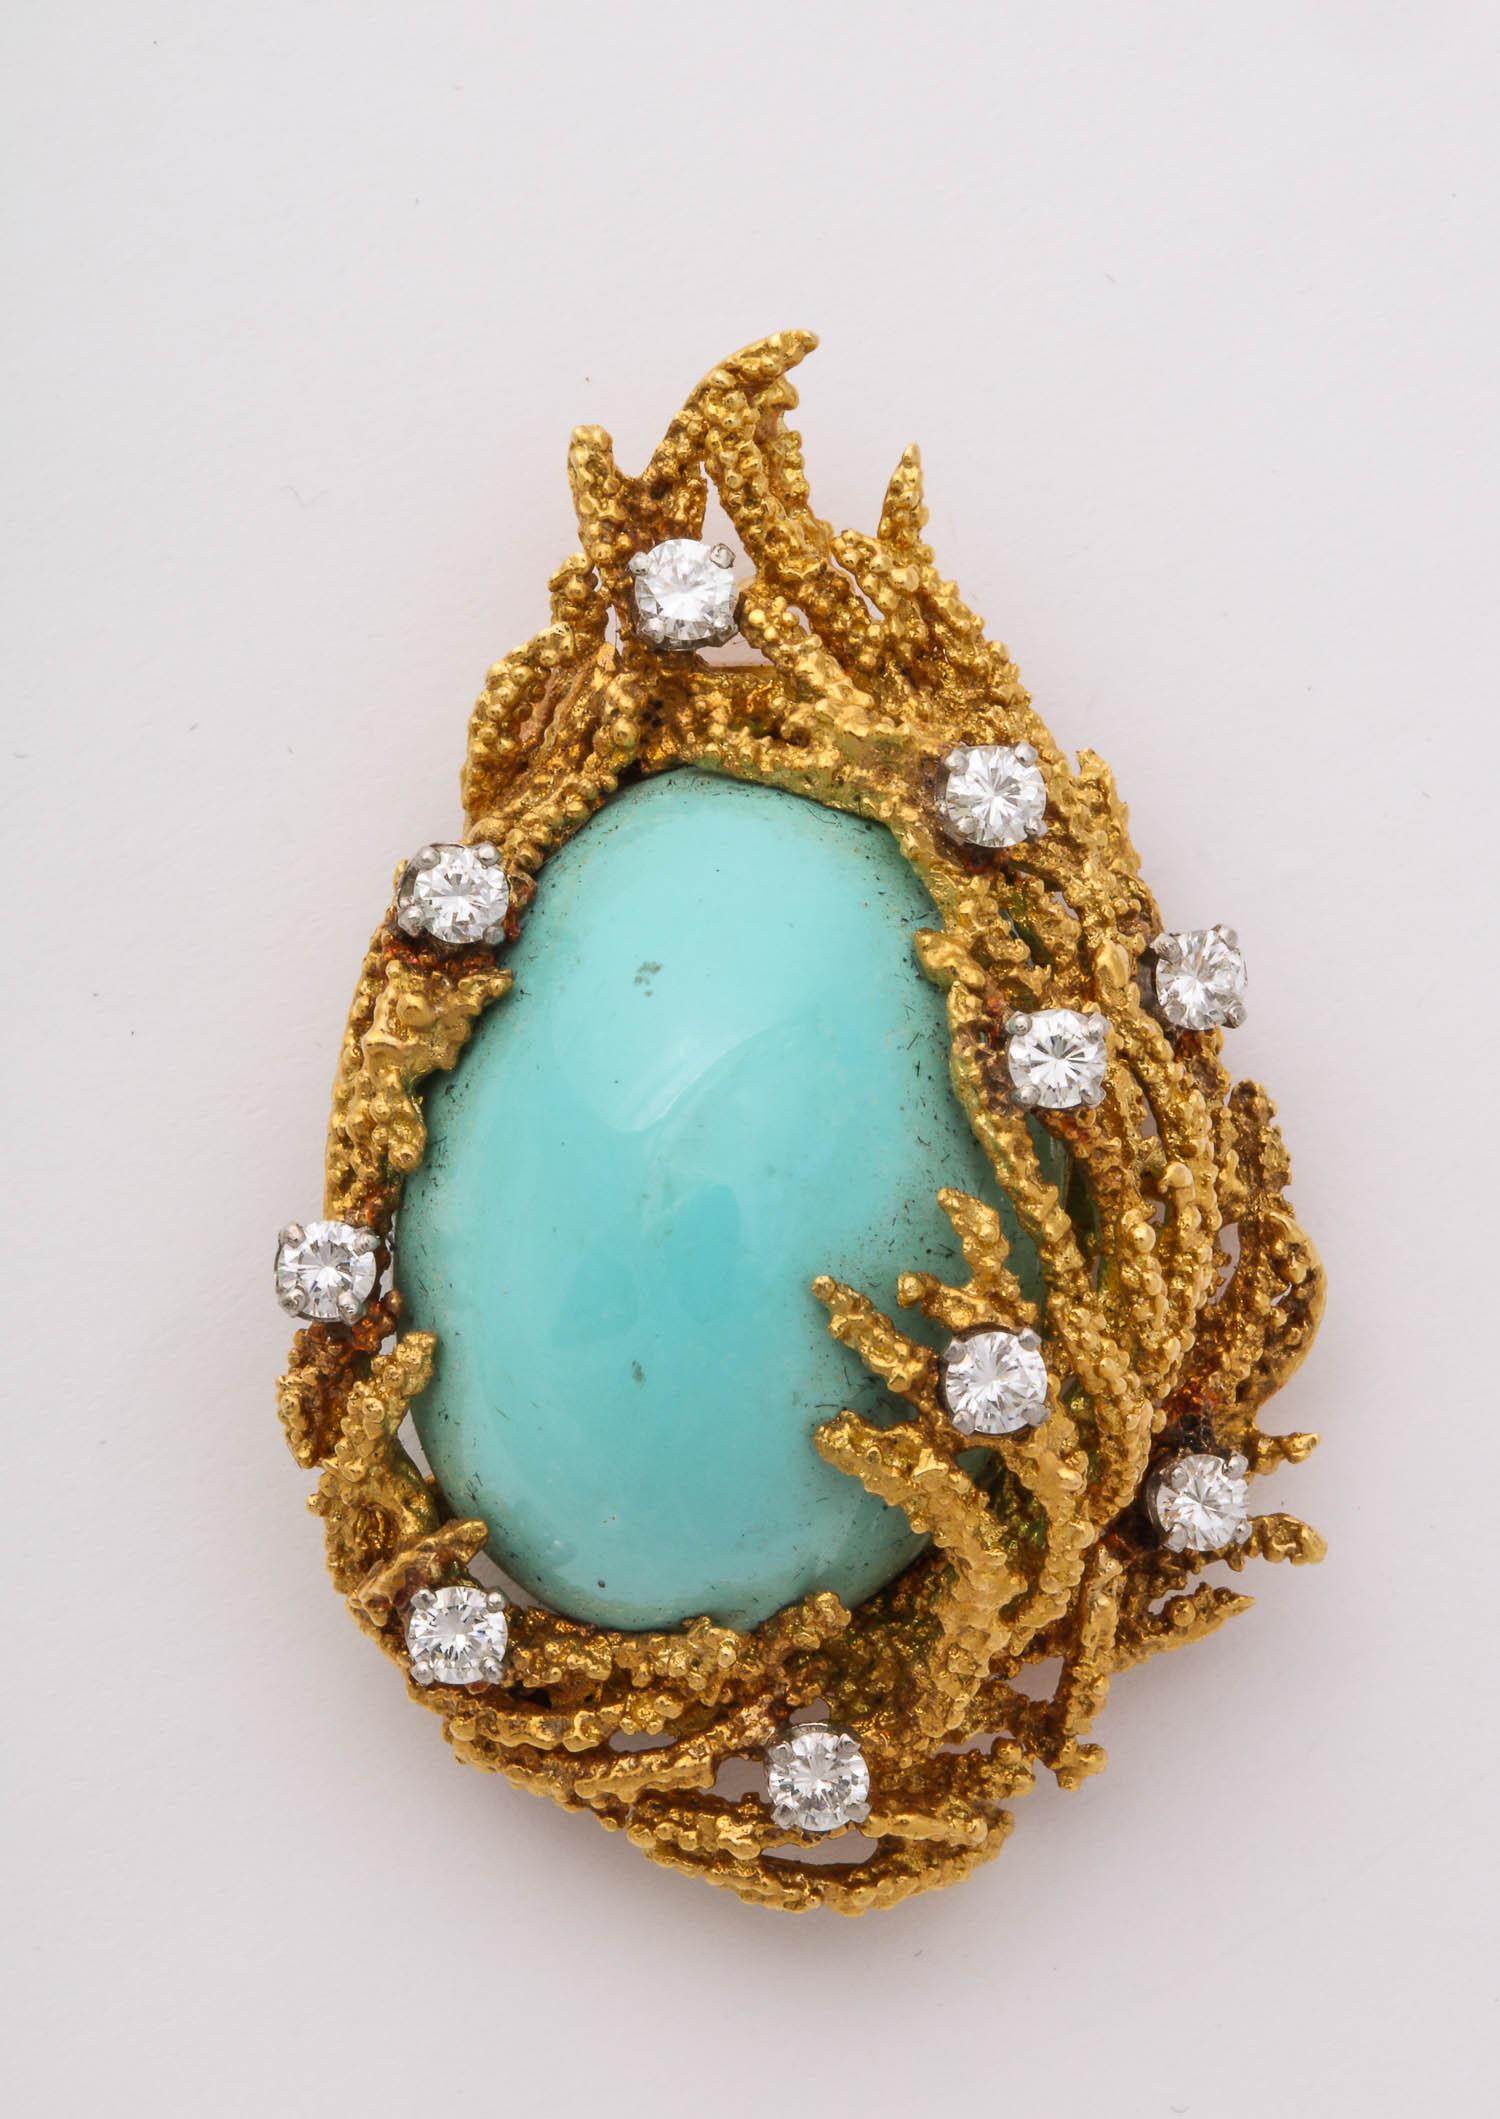 18k abstract gold brooch, centering a large cabochon Natural Turquoise (25 x 18mm)  10 diamonds 1.00 carat, 28 grams of 18k yellow gold 